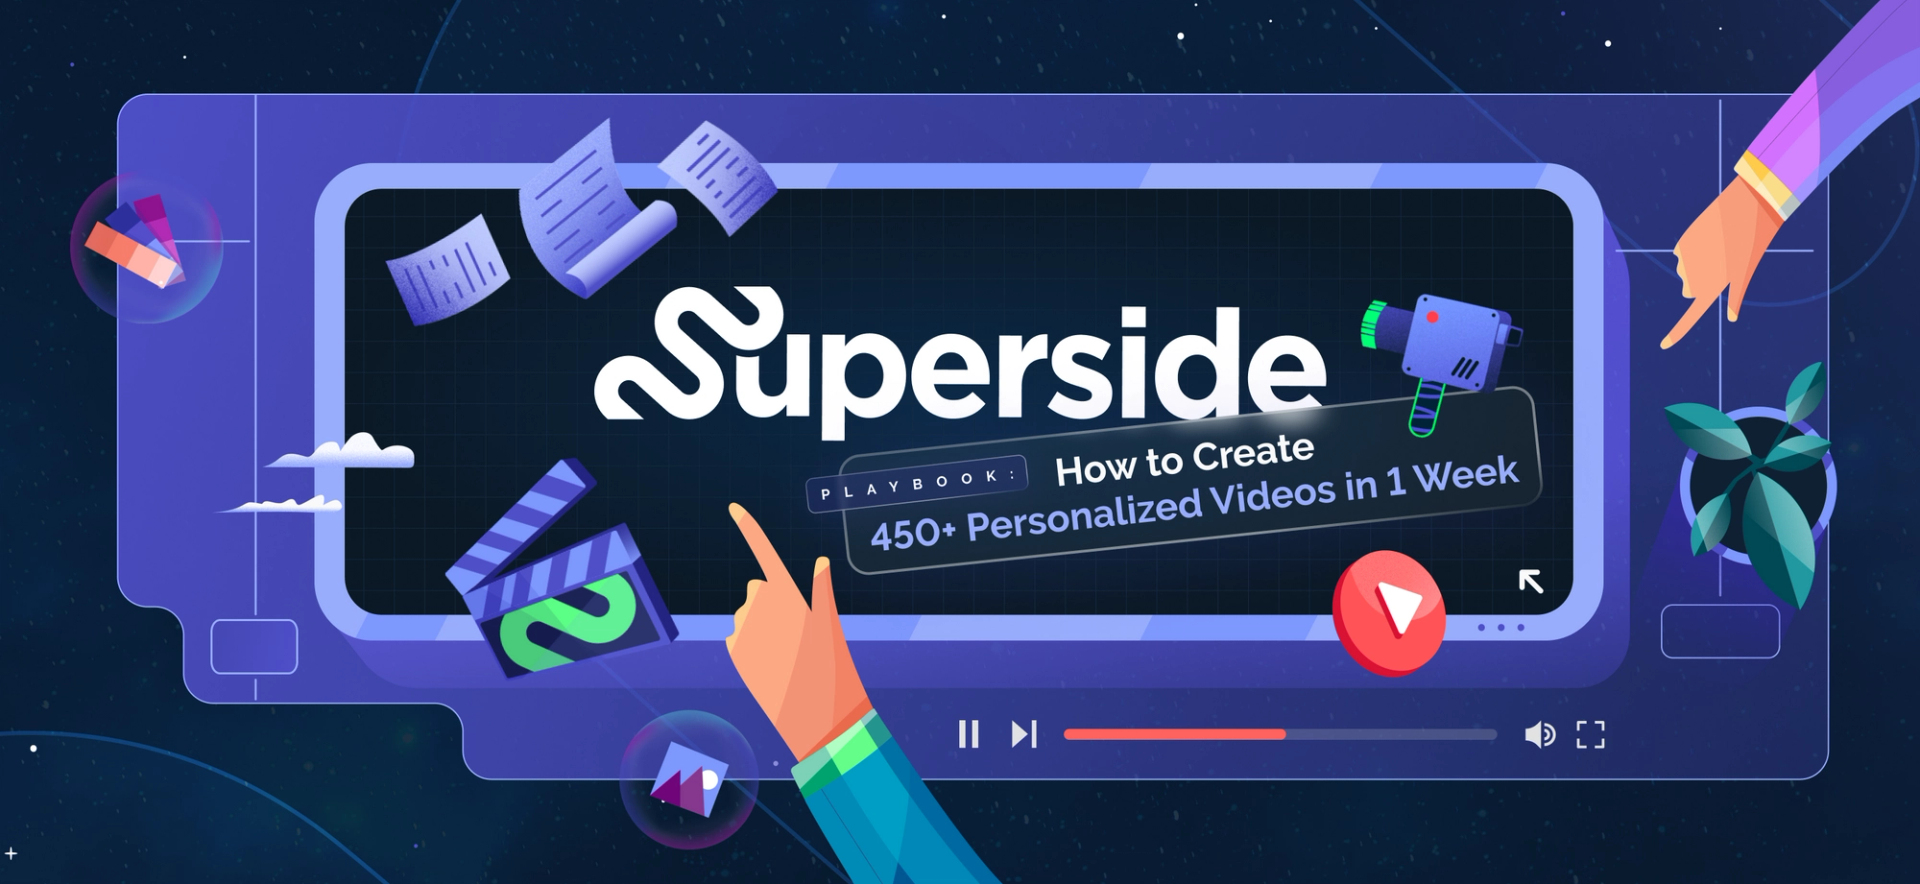 How To Create 450+ Personalized Videos in a Week